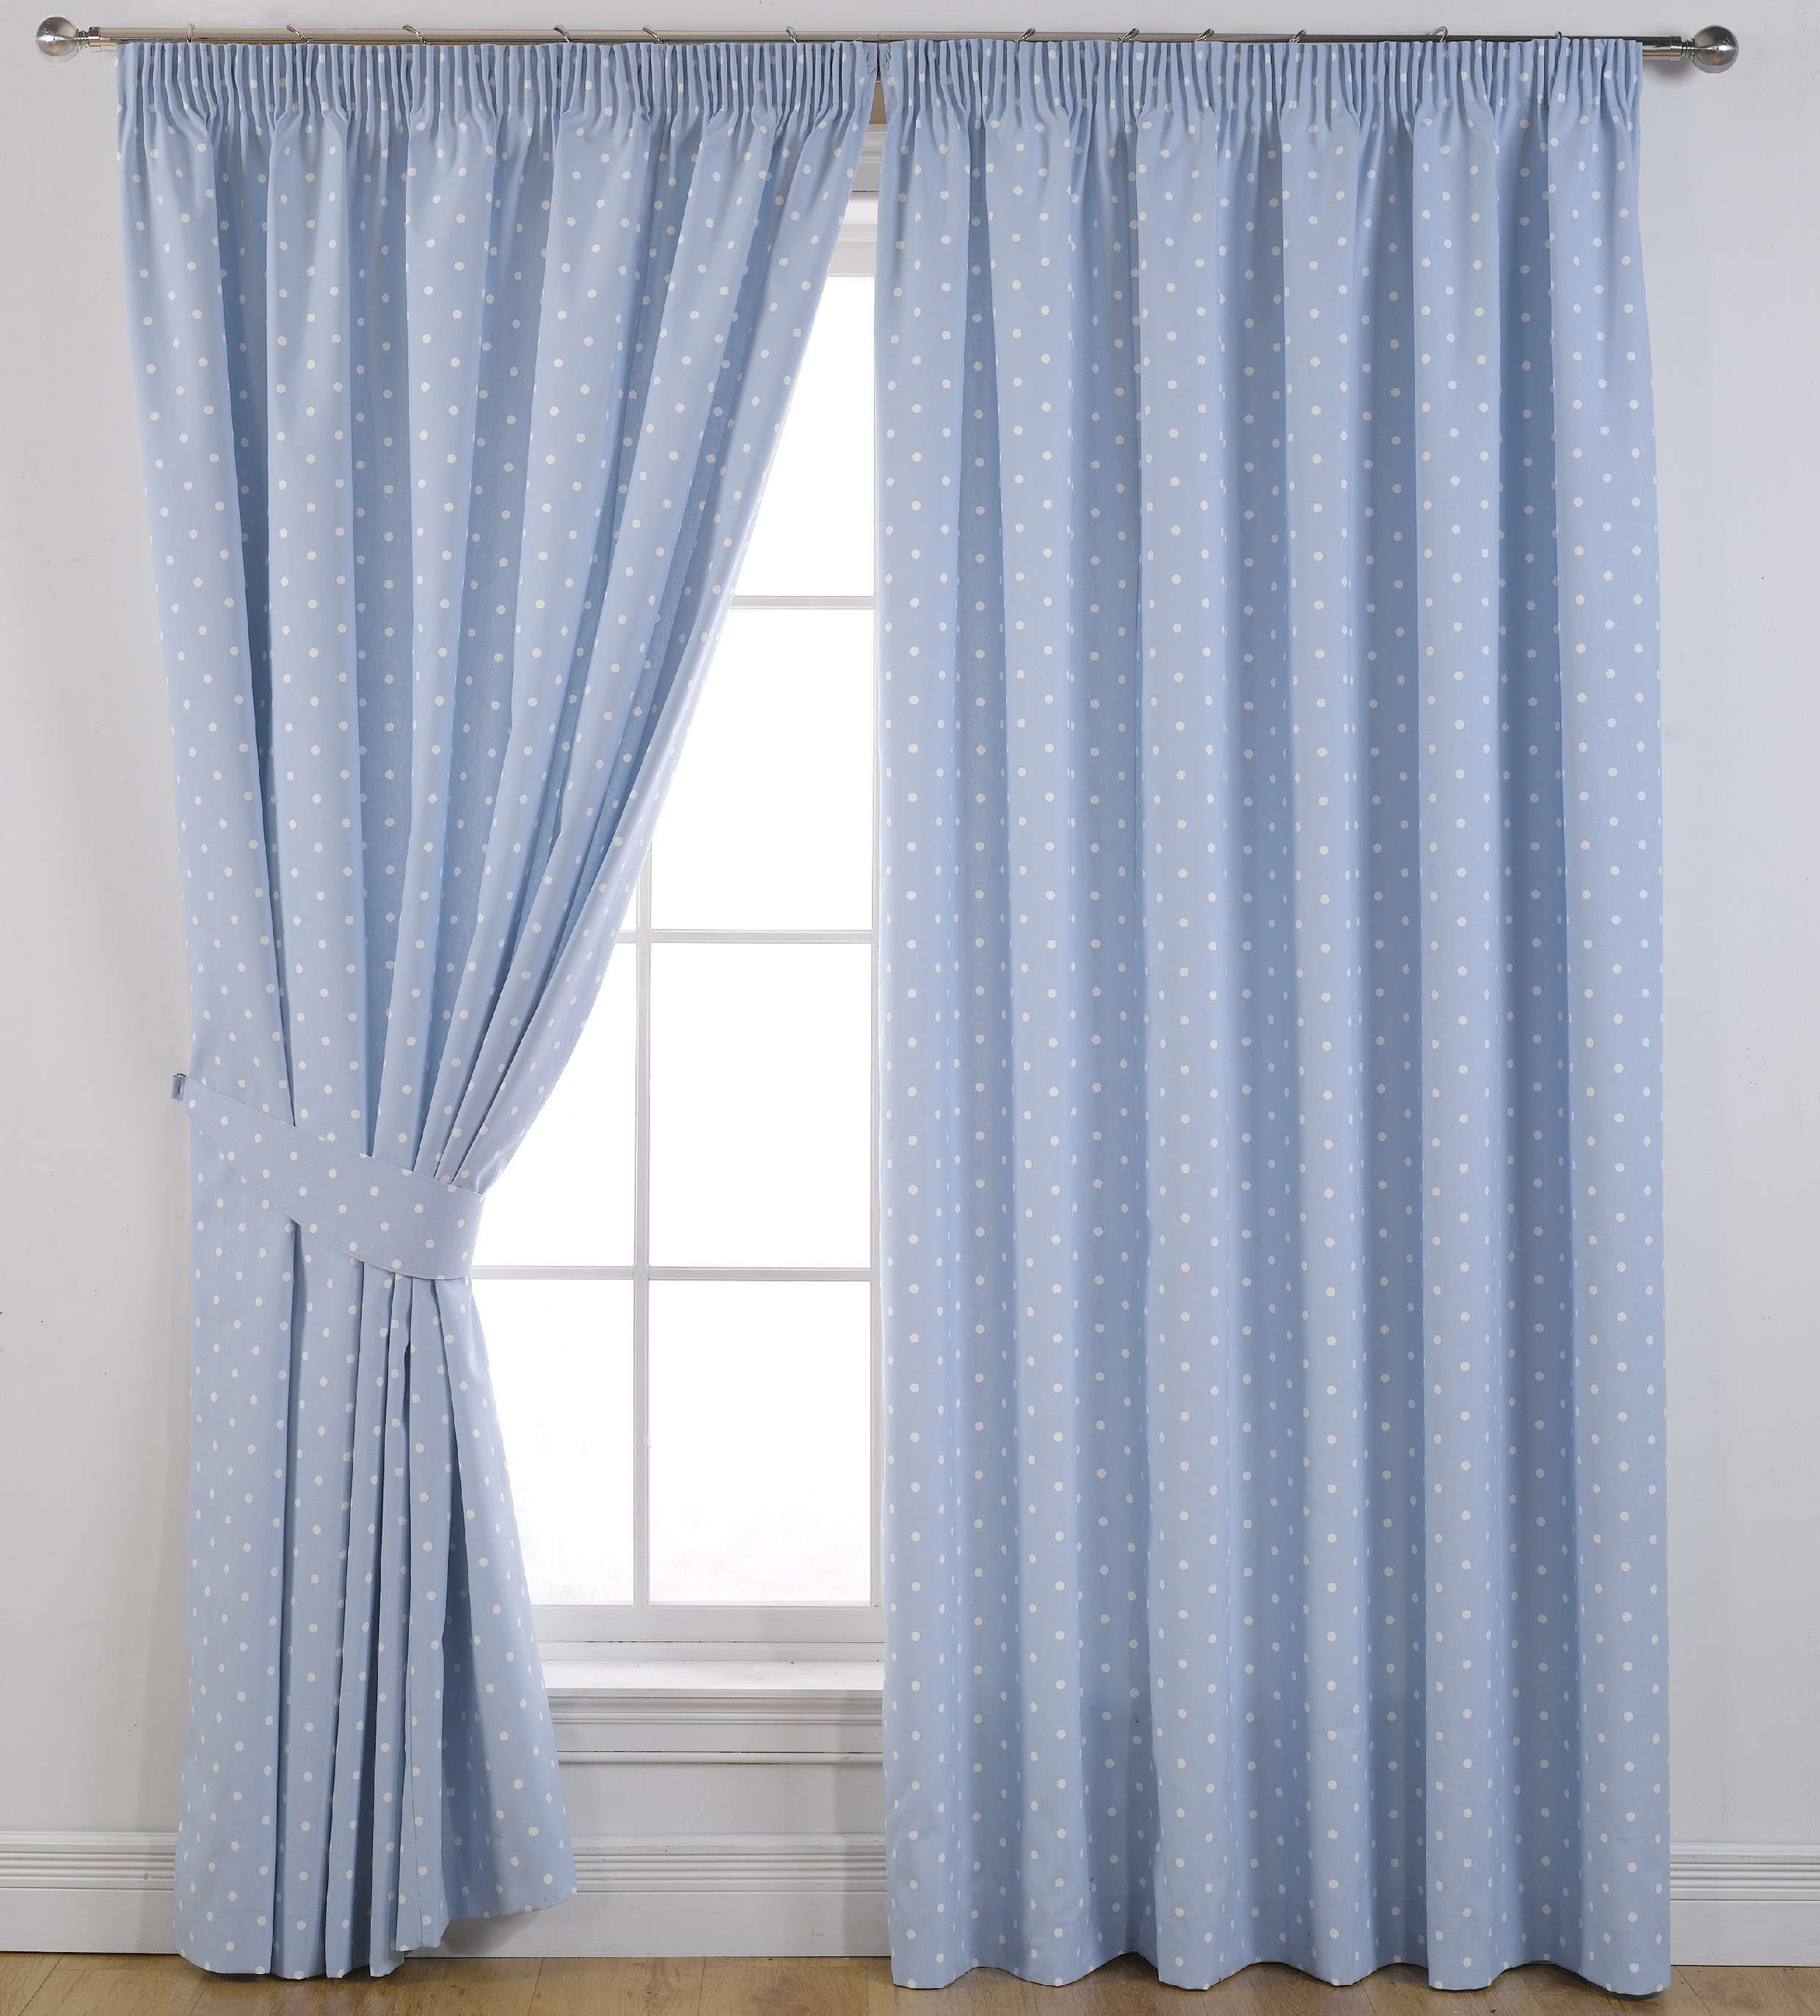 2480x2747px 7 Charming Darkening Curtains Picture in Others